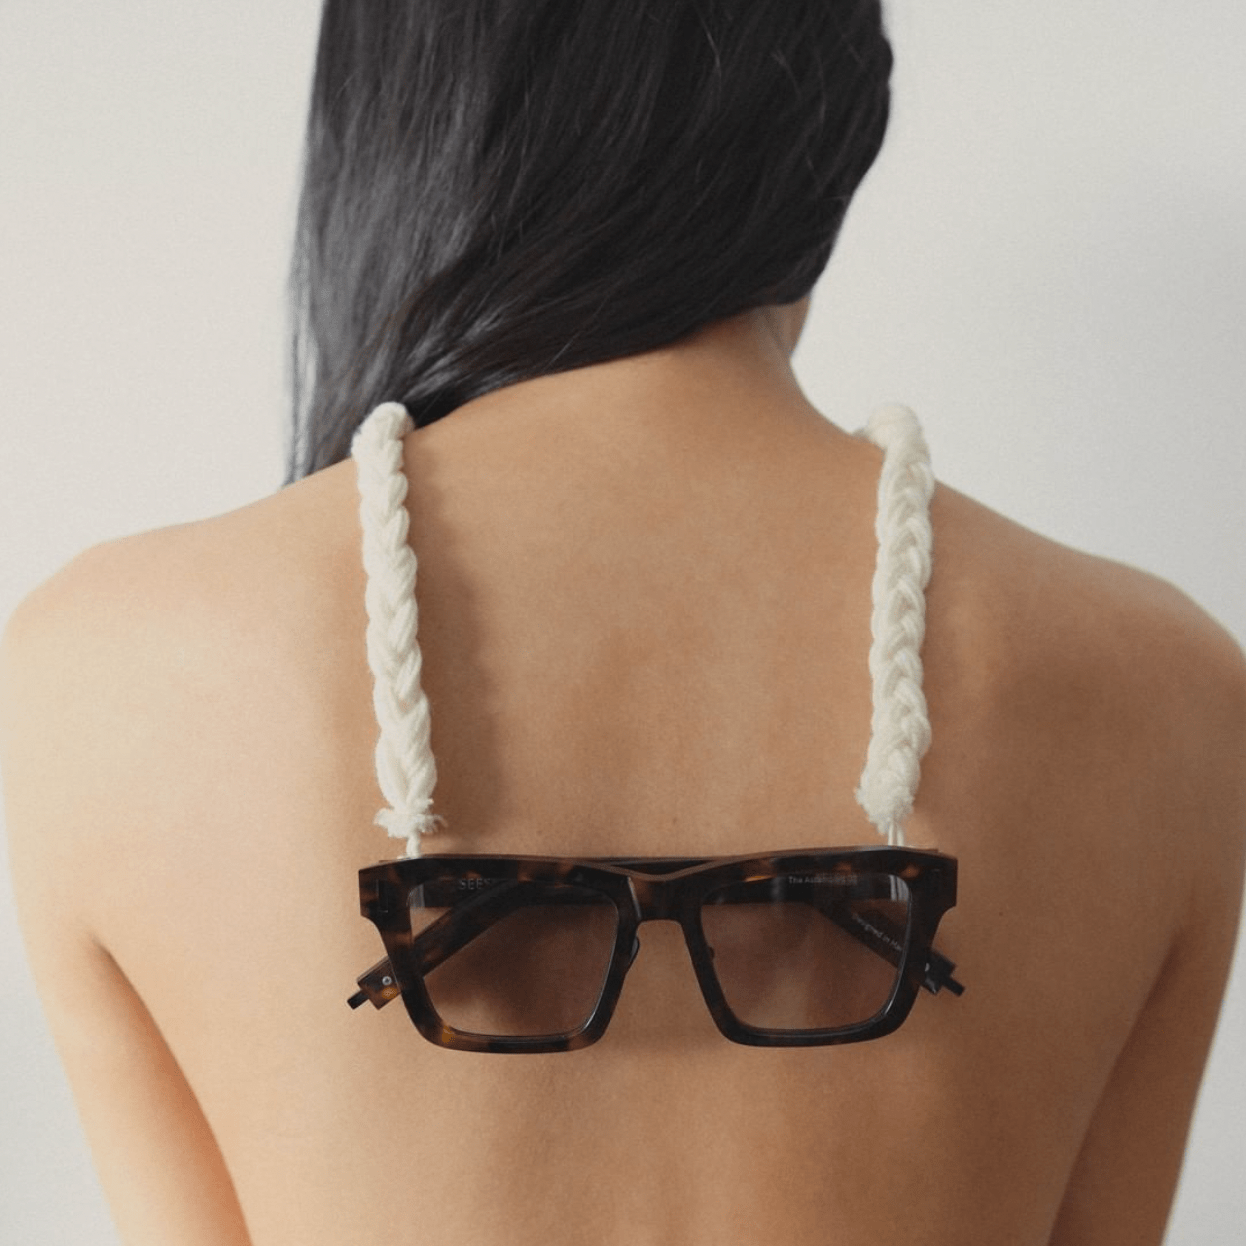 5 local brands ready trendy frames for you f5 style